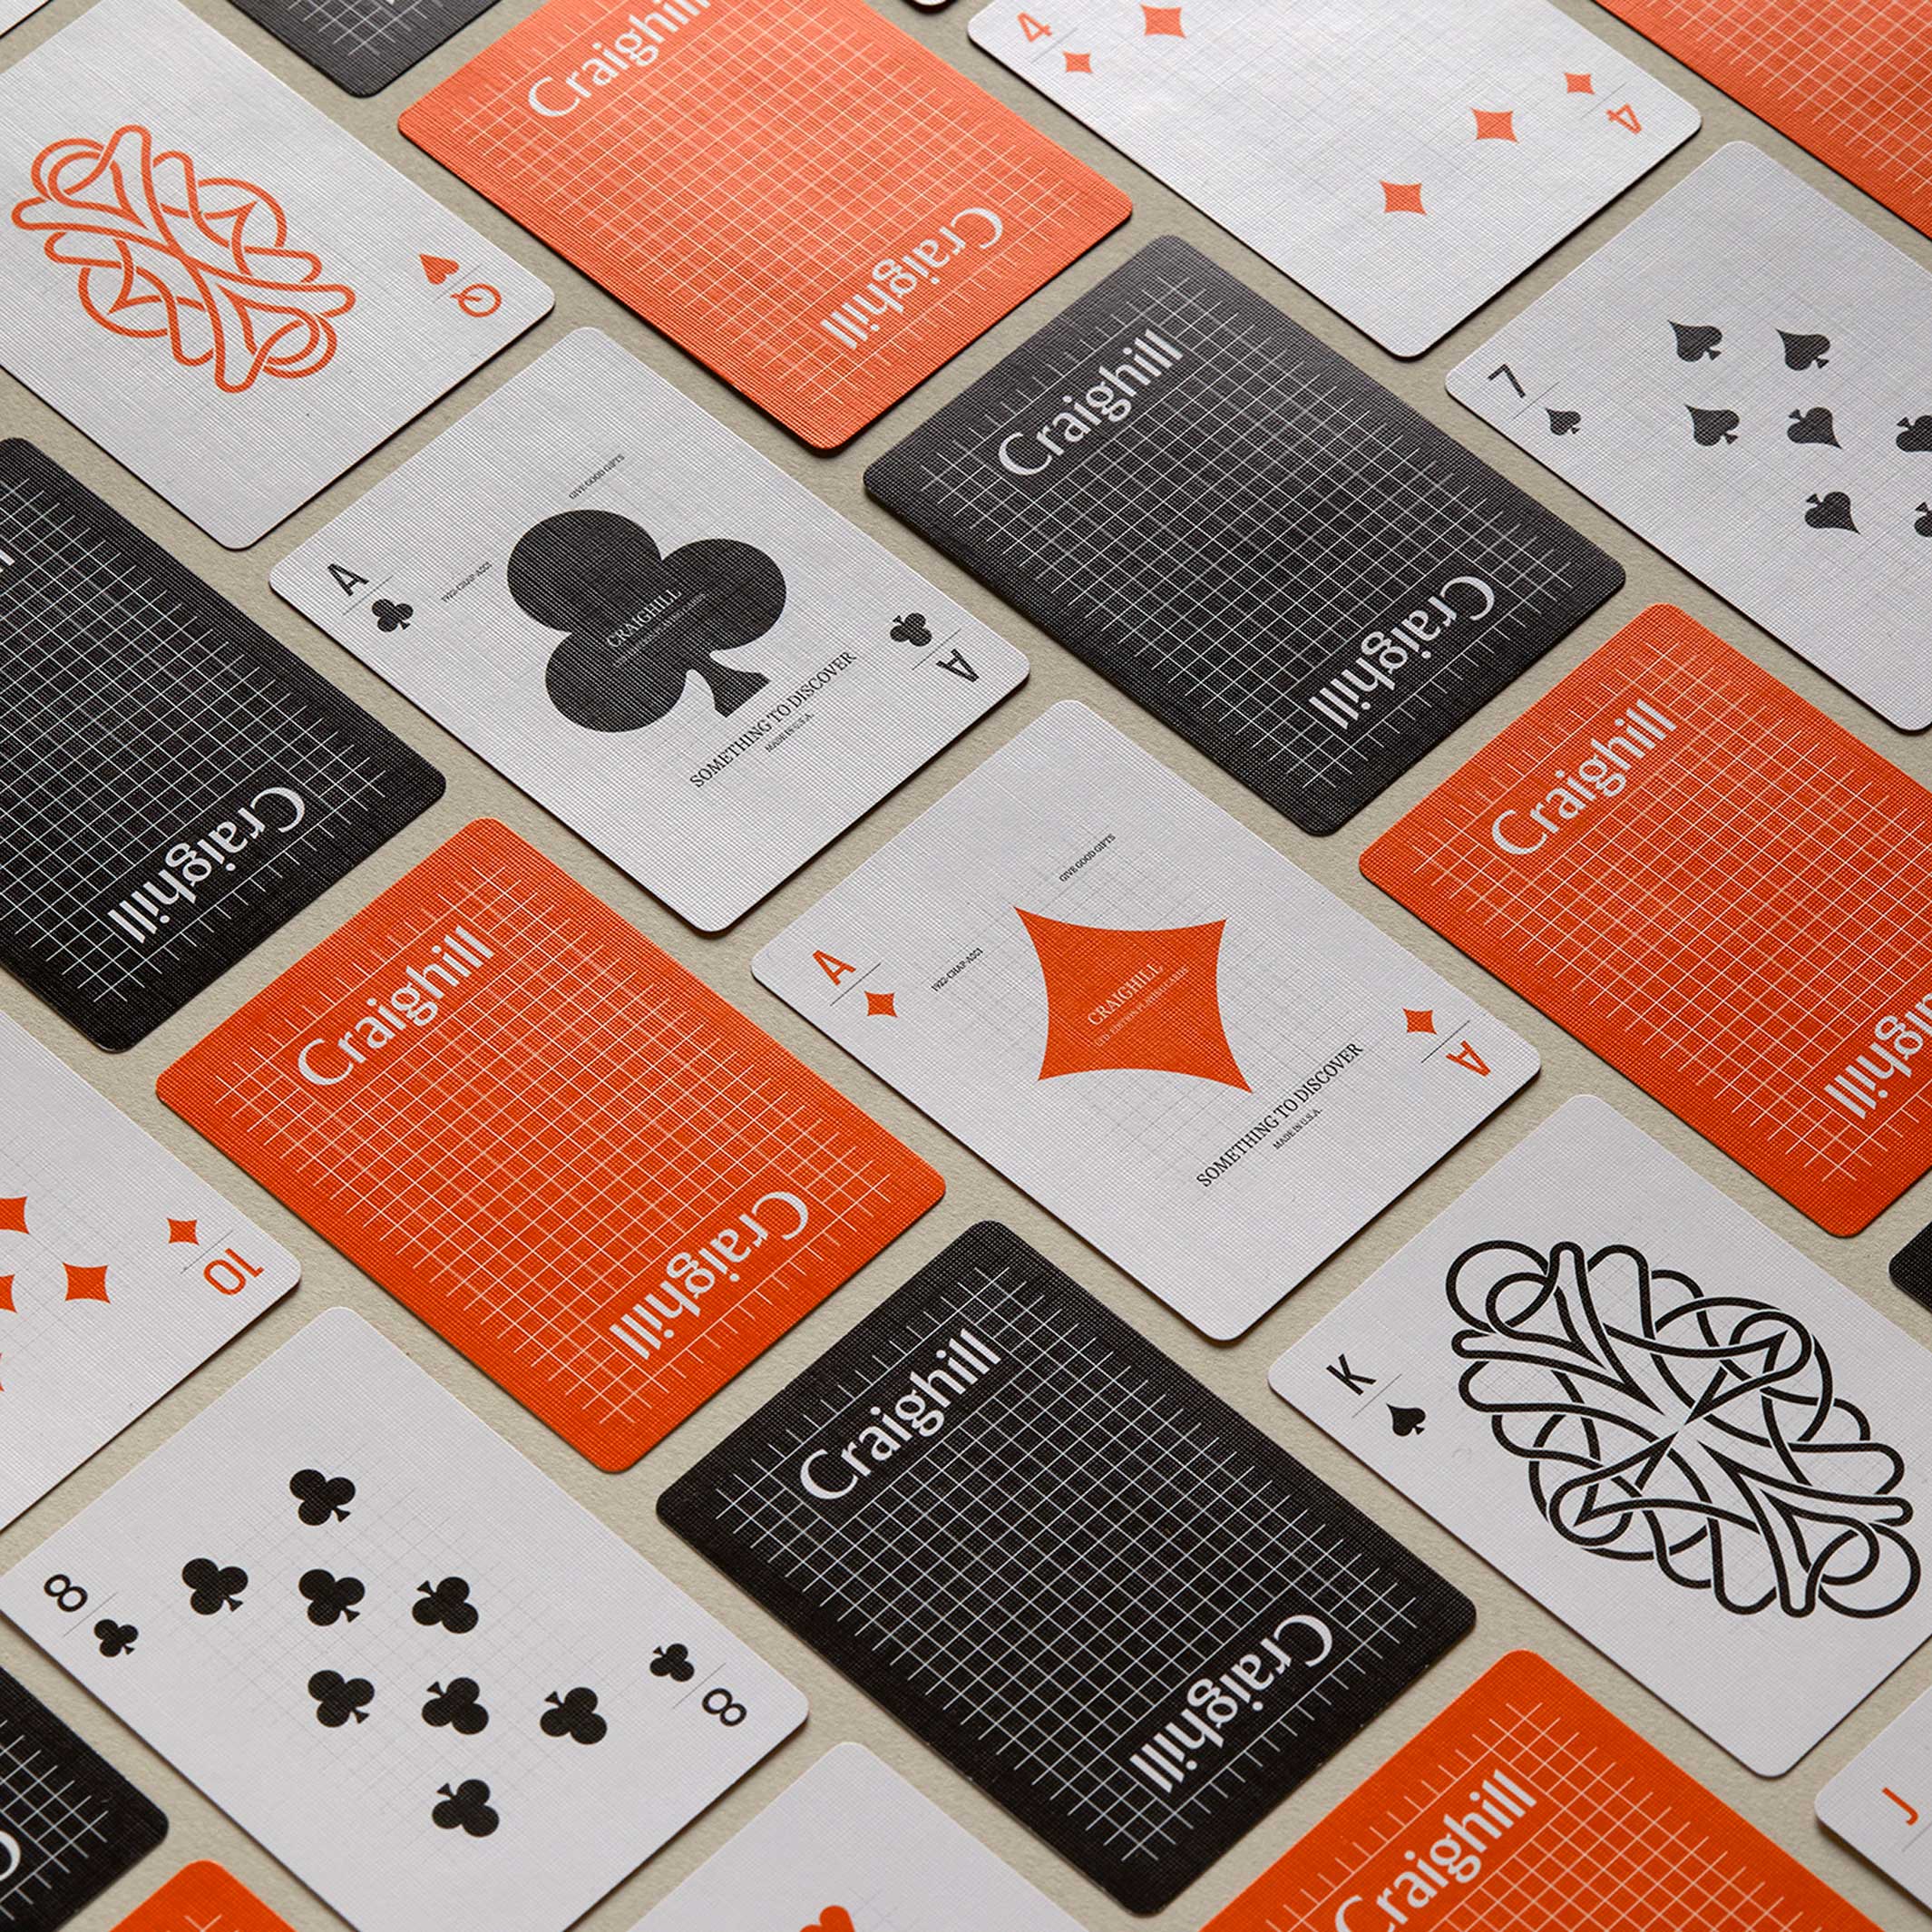 PLAYING CARDS | White pack with orange cards | Craighill